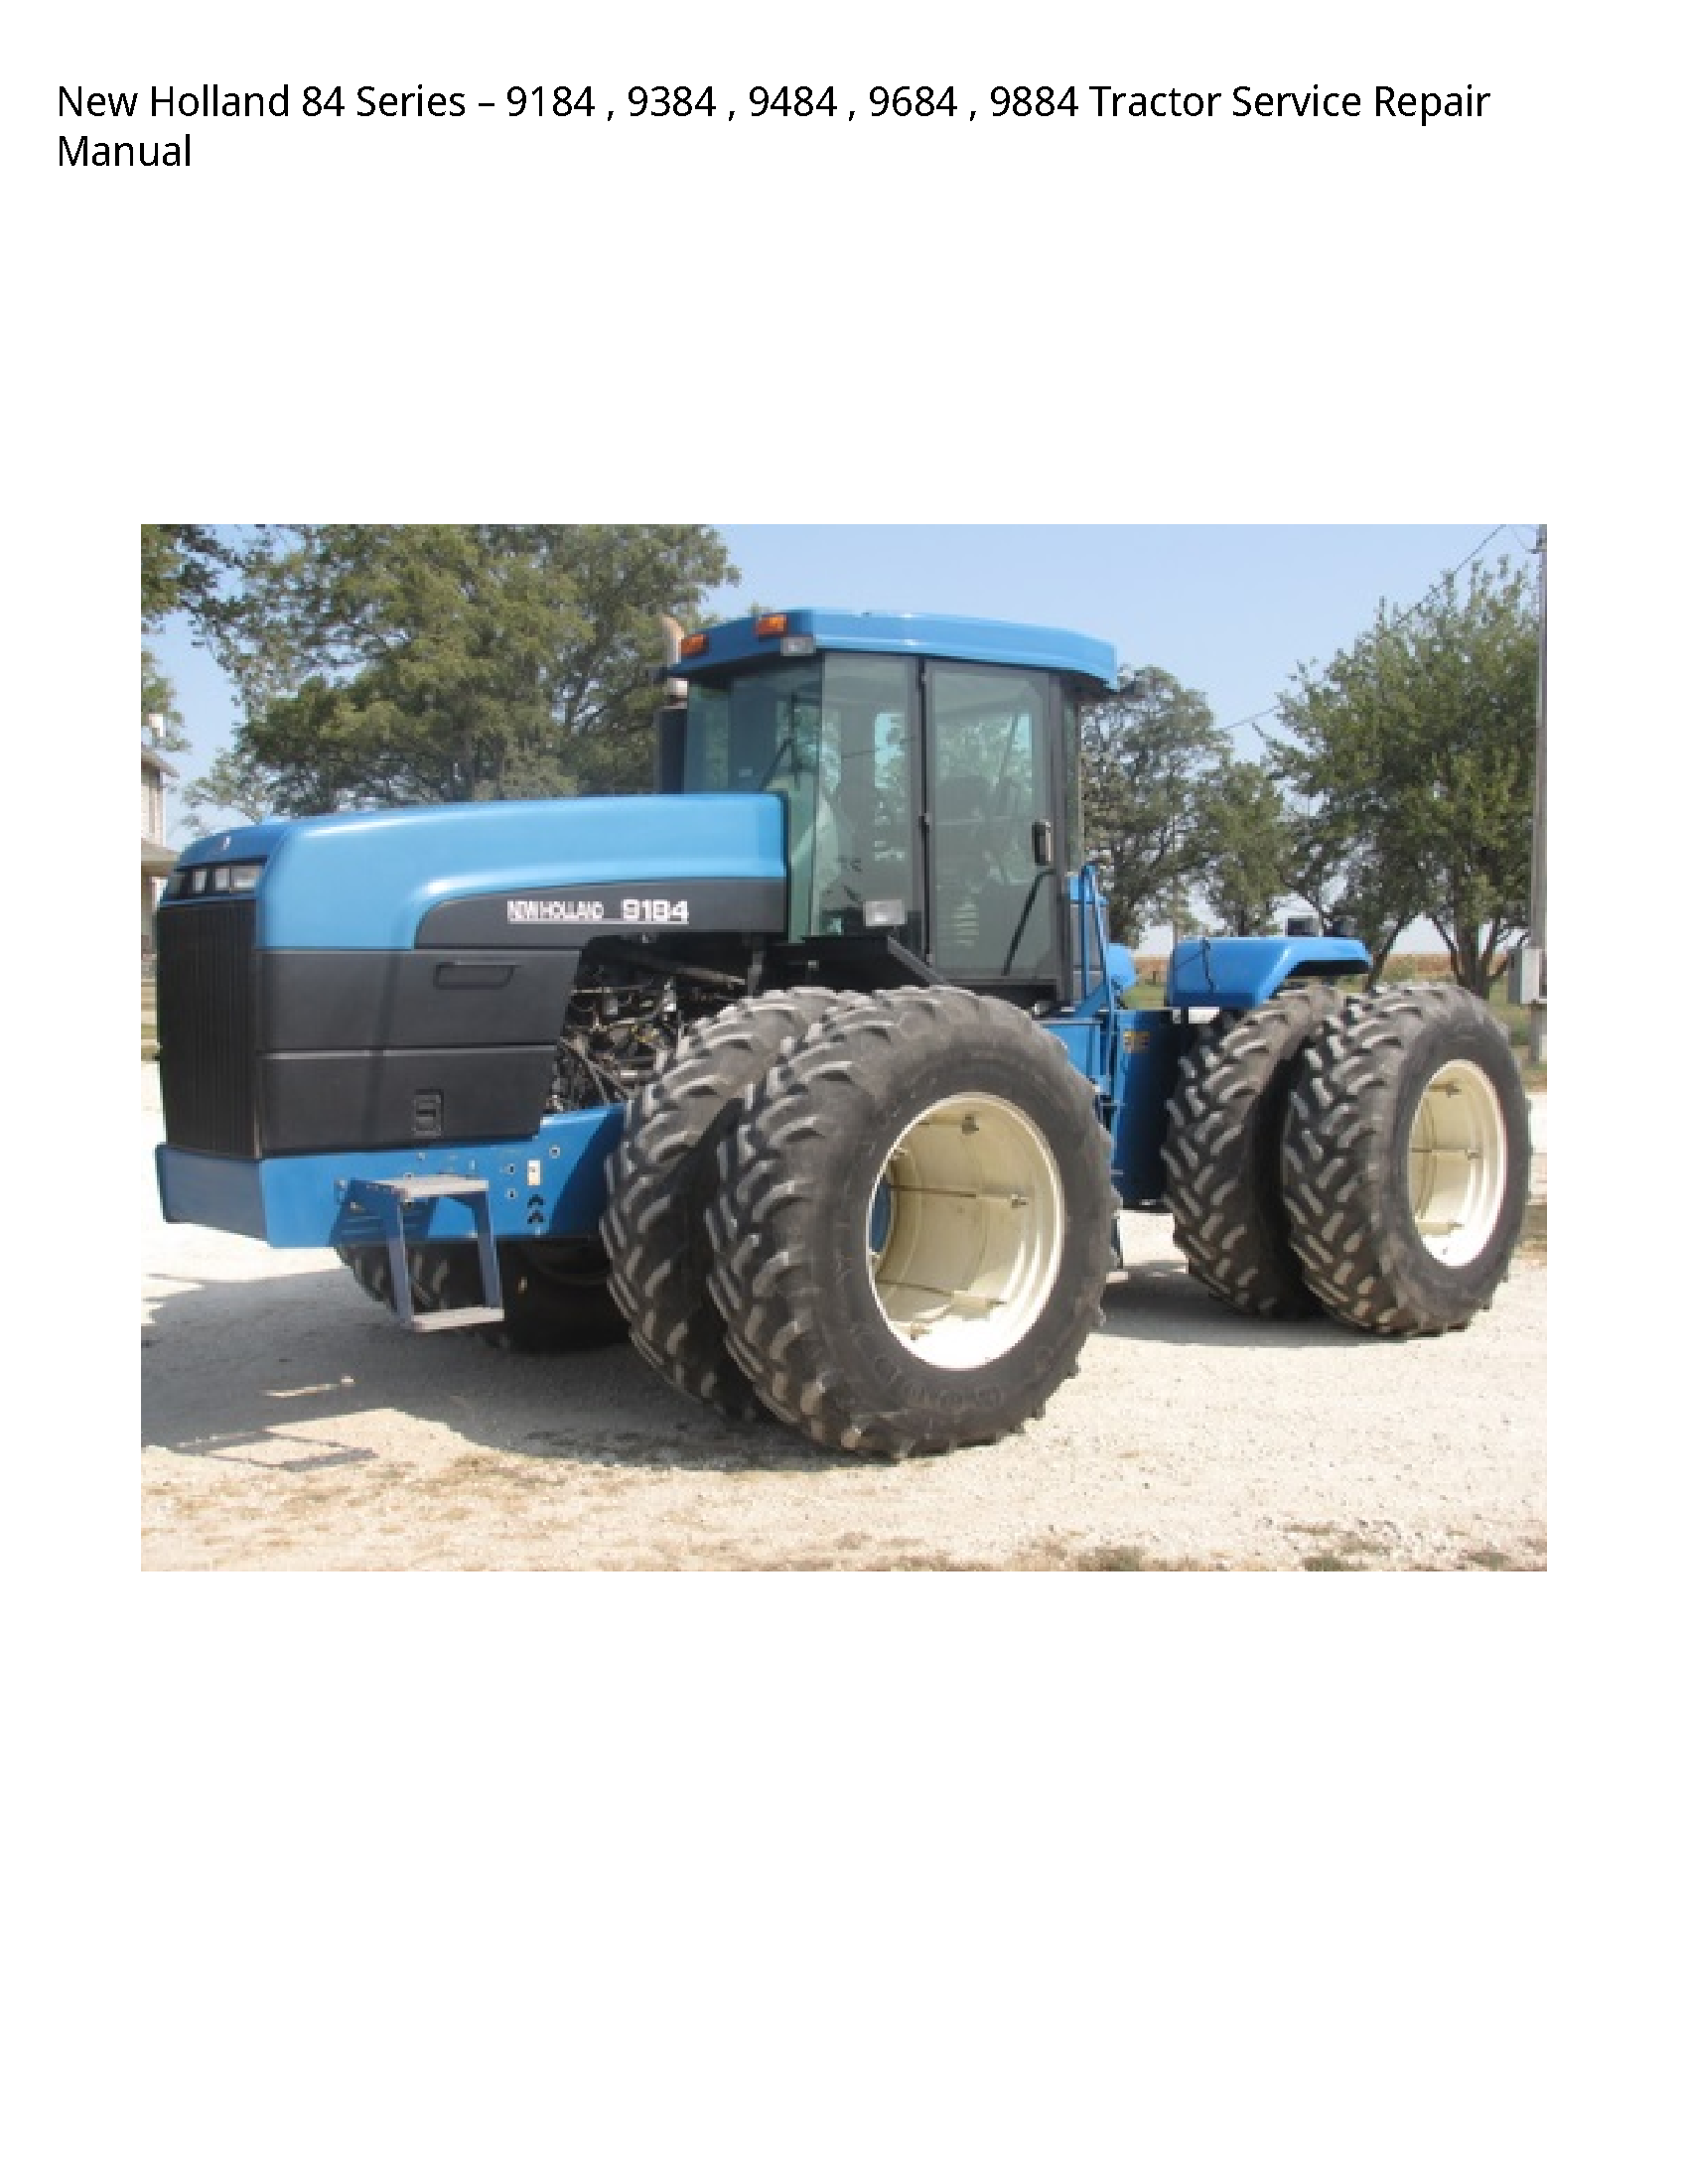 New Holland 84 Series Tractor manual